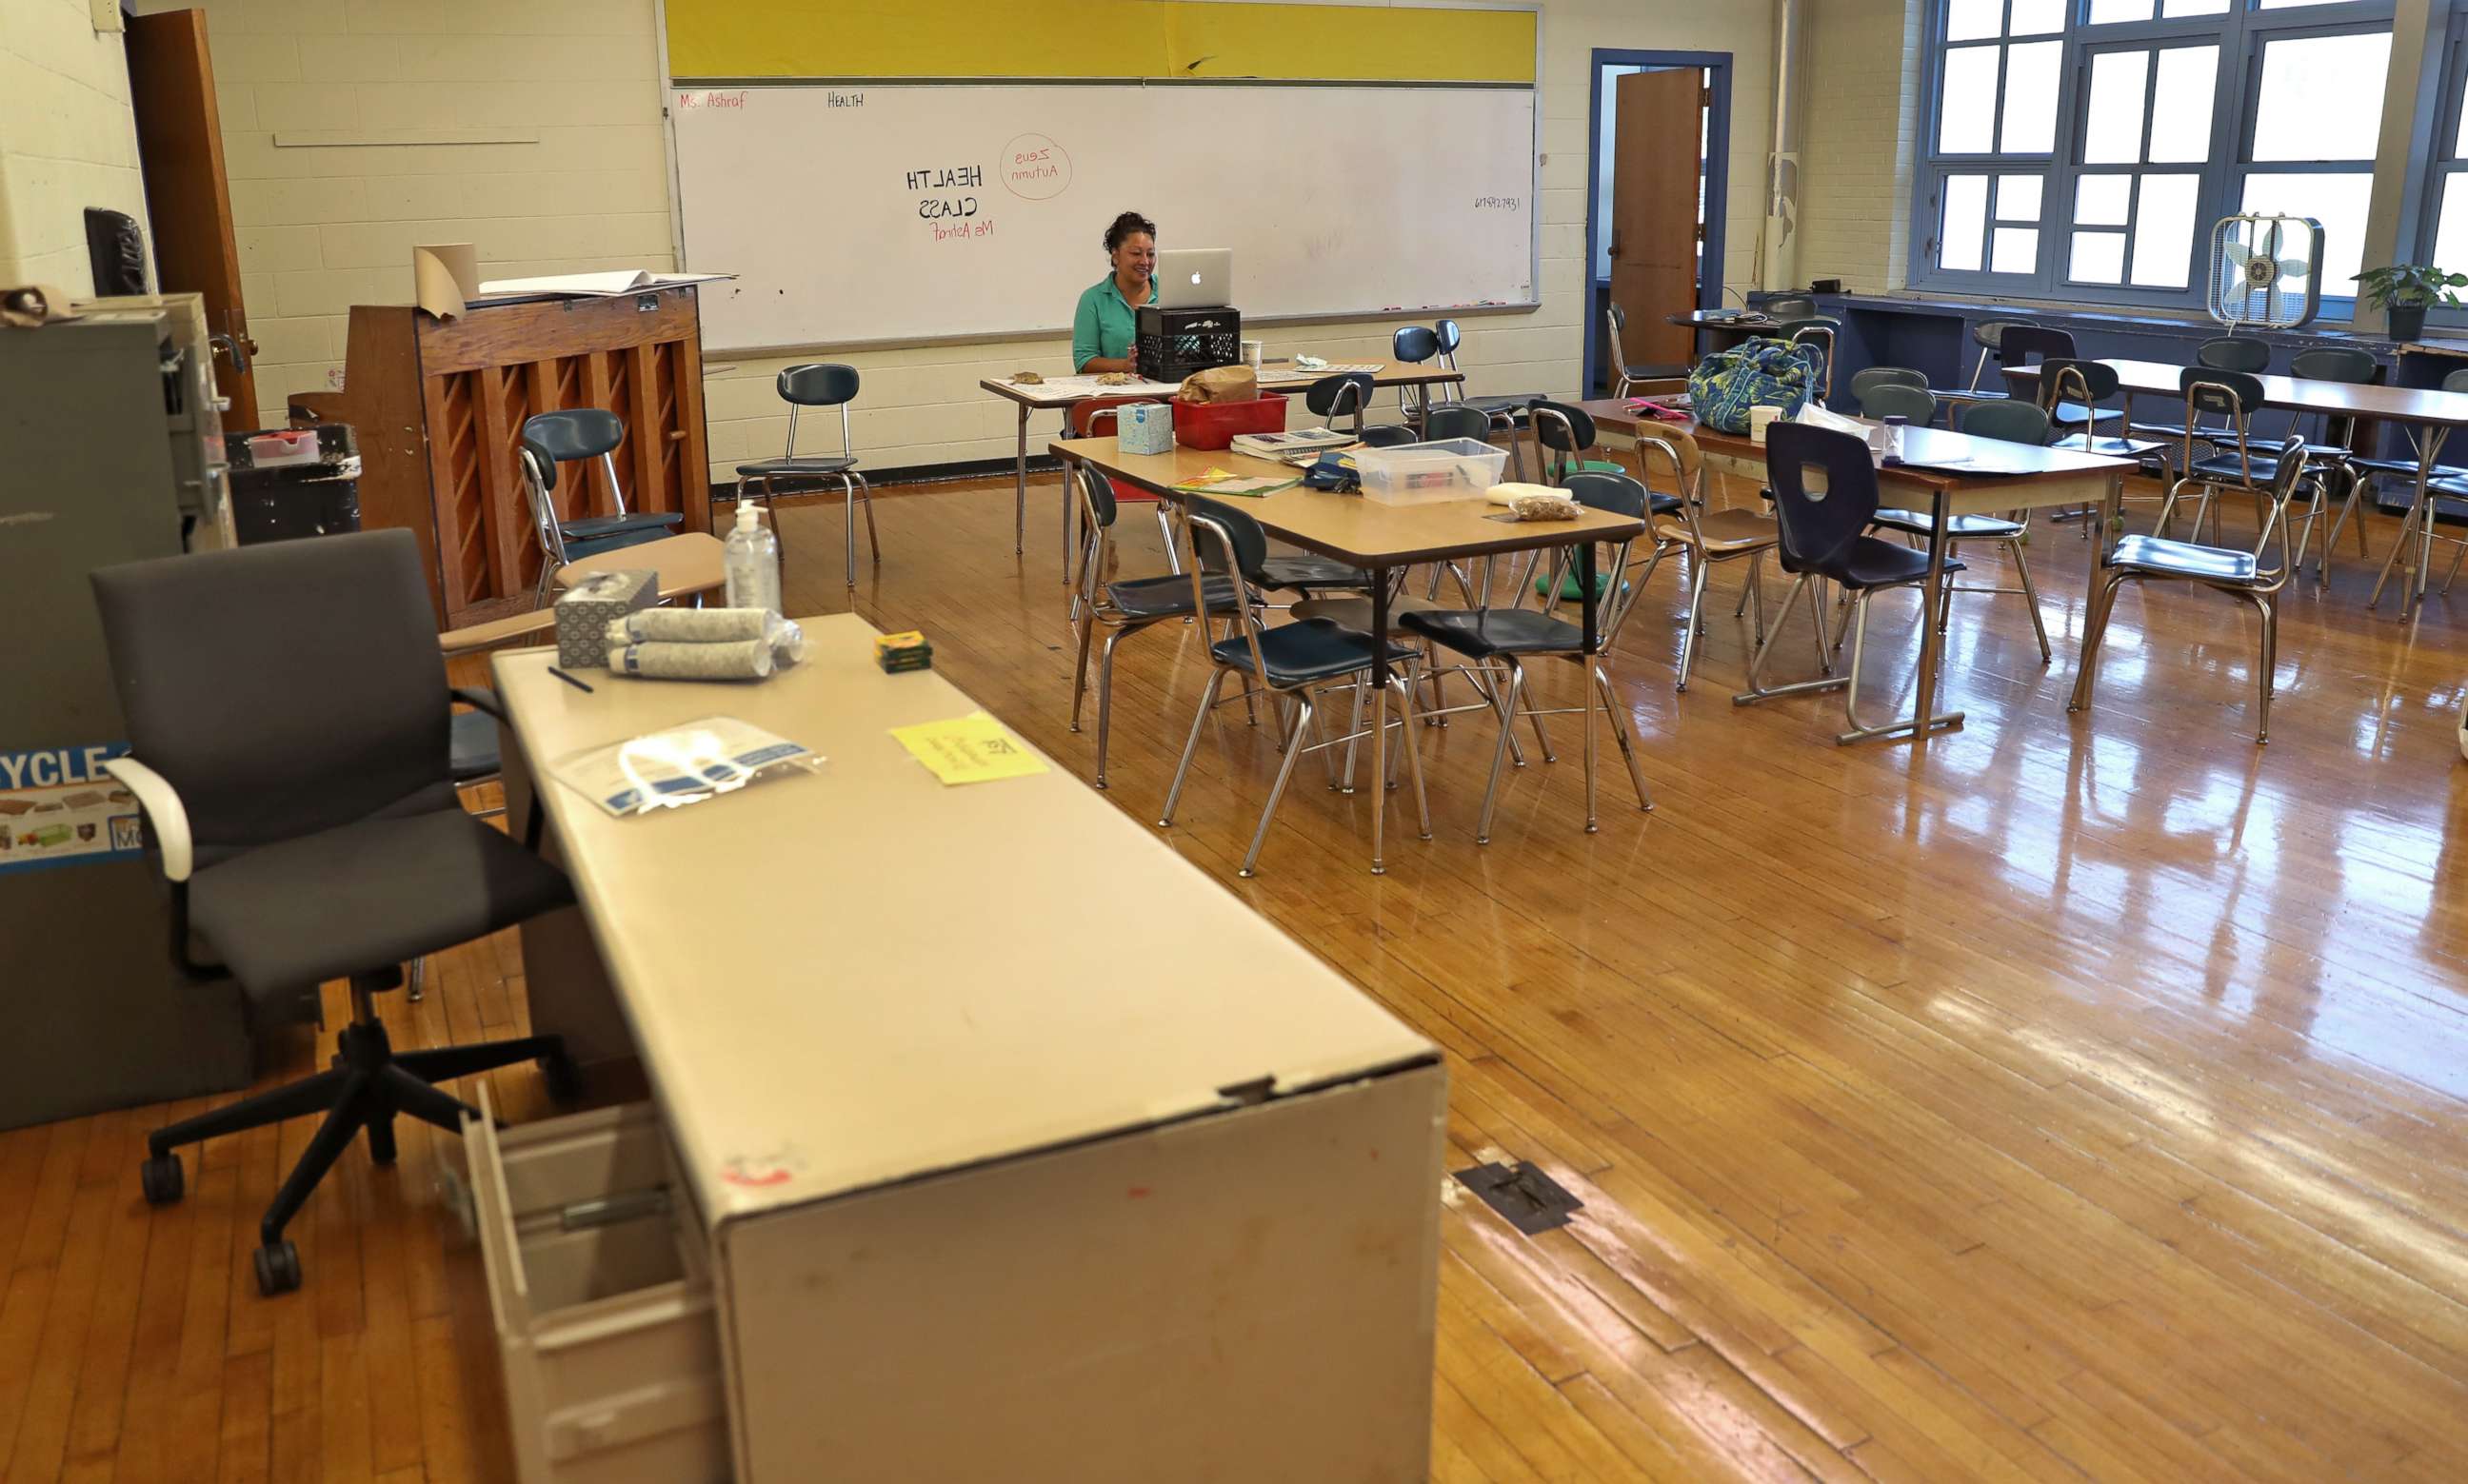 PHOTO: Ms. Nilo Ashraf, a health teacher, works on remote school with 7th and 8th grade students from an empty classroom at McCormack Middle School in Boston's Dorchester on Sept. 21, 2020.